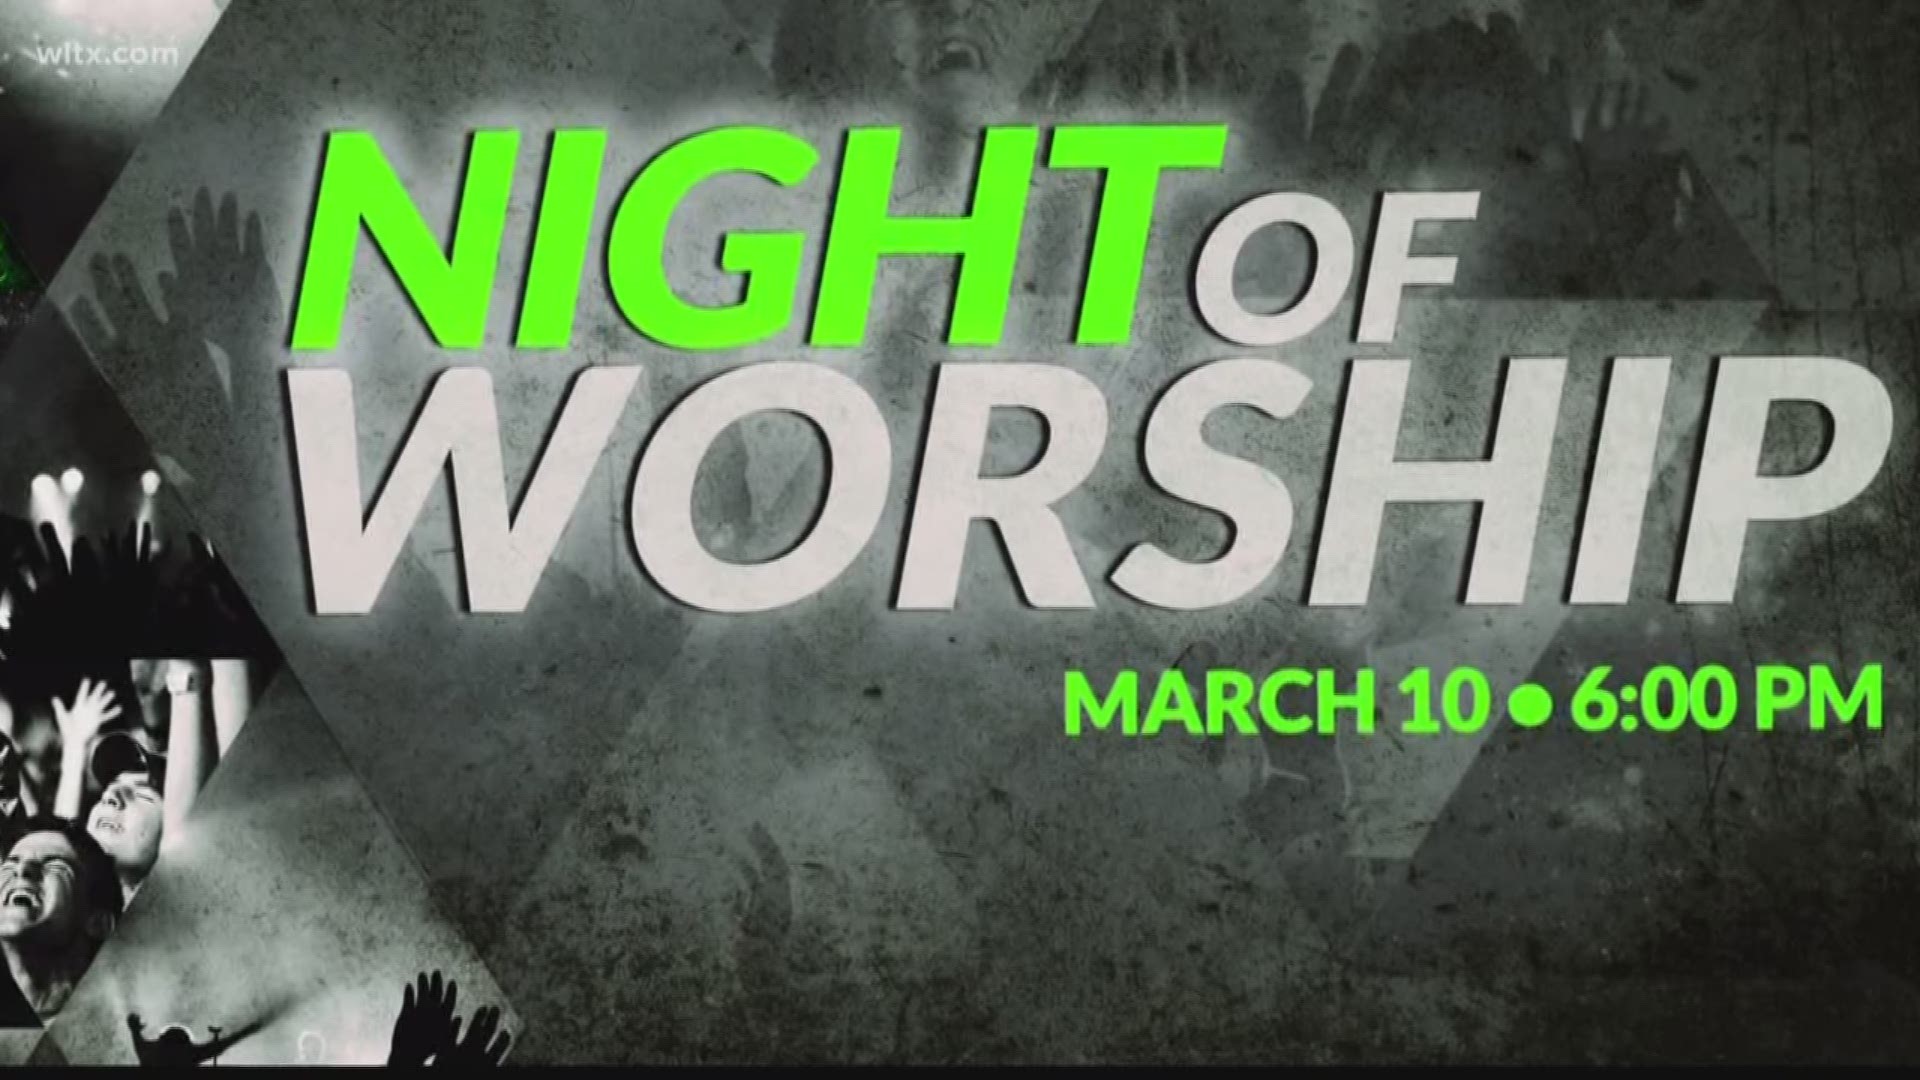 On March 3, three churches are coming together to host a night of worship.